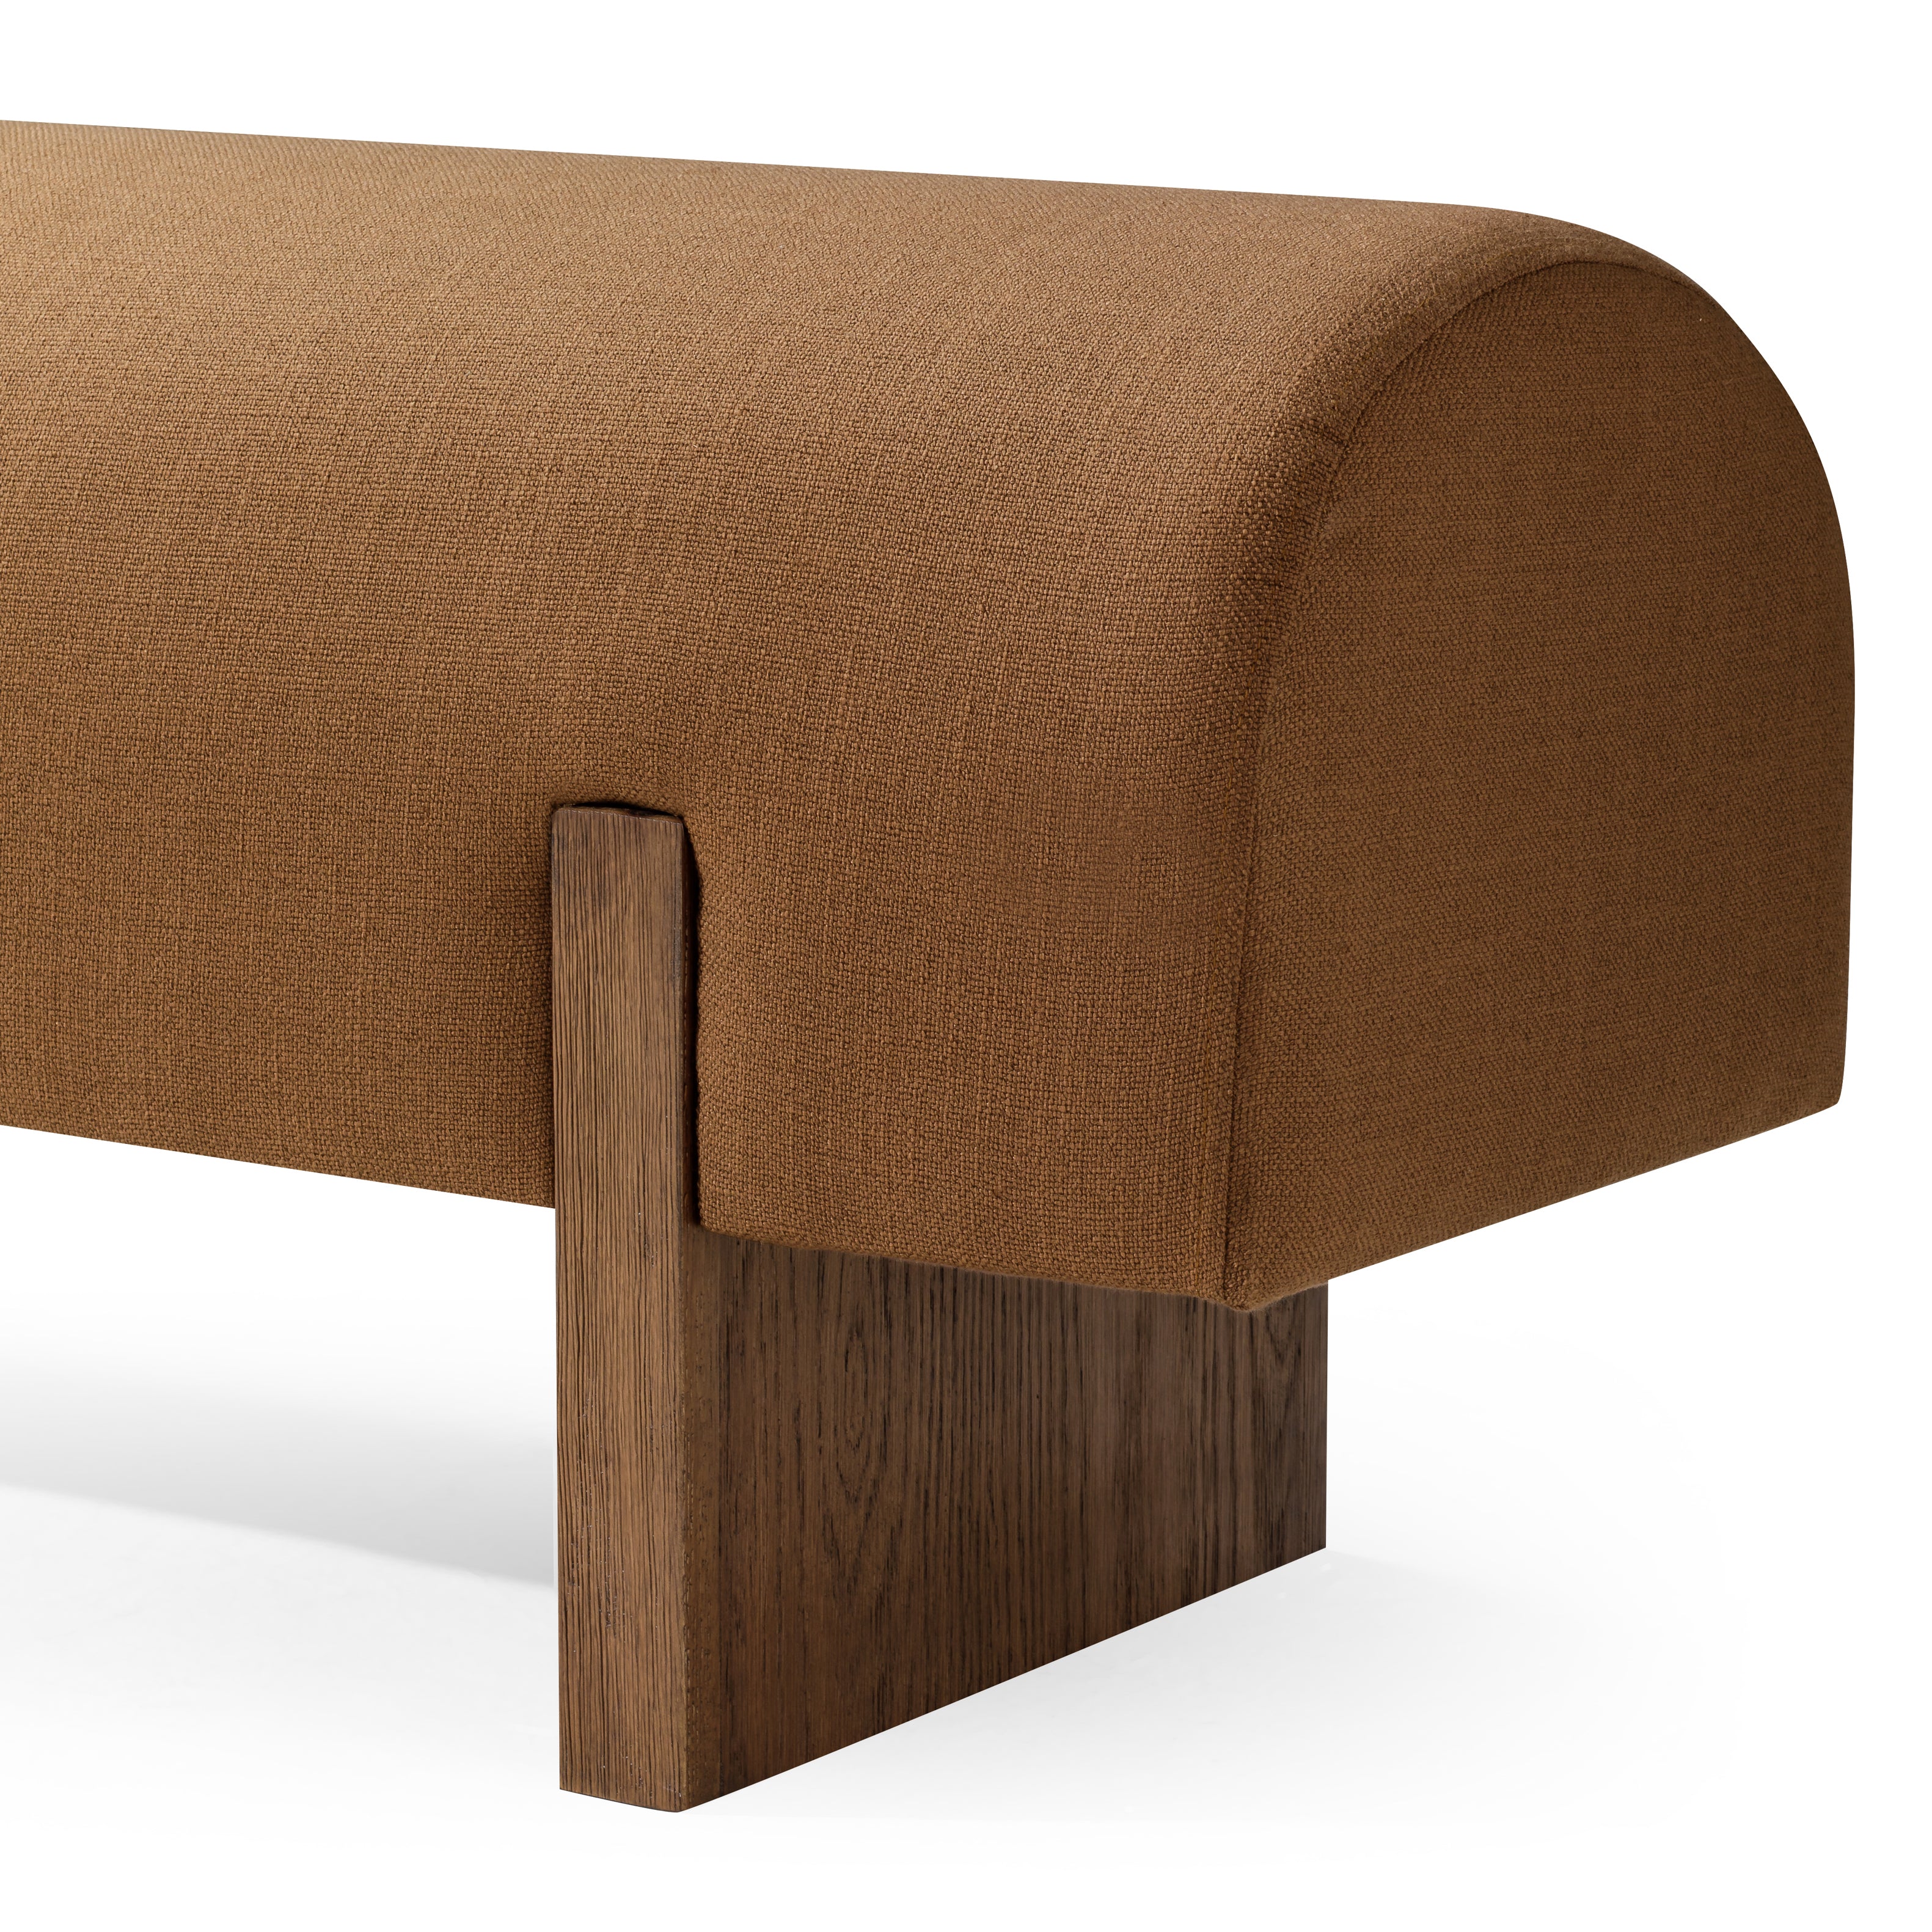 Juno Contemporary Upholstered Wooden Bench in Refined Brown Finish in Ottomans & Benches by Maven Lane